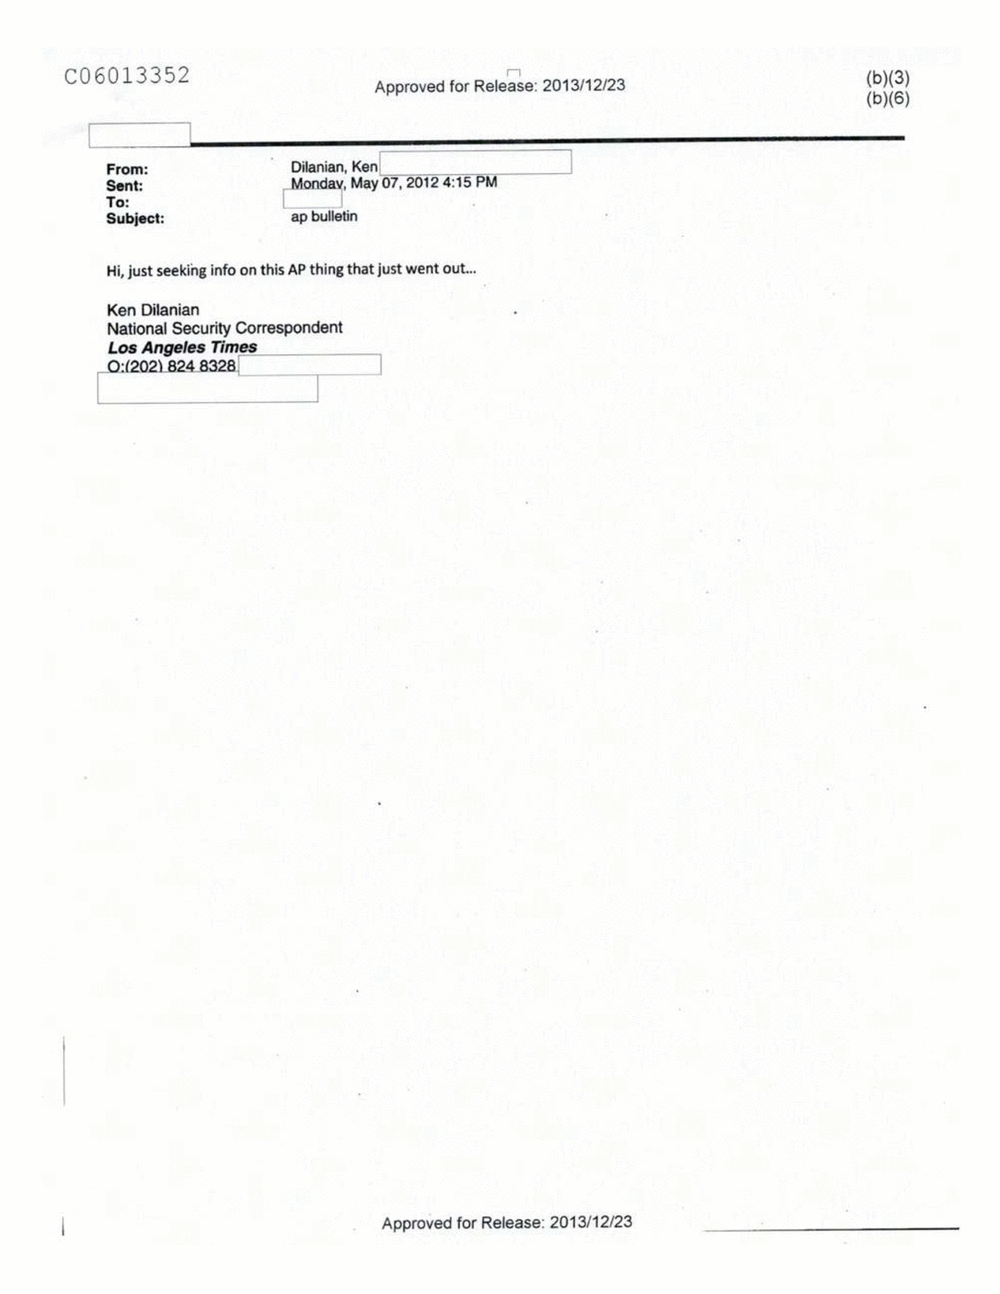 Page 265 from Email Correspondence Between Reporters and CIA Flacks